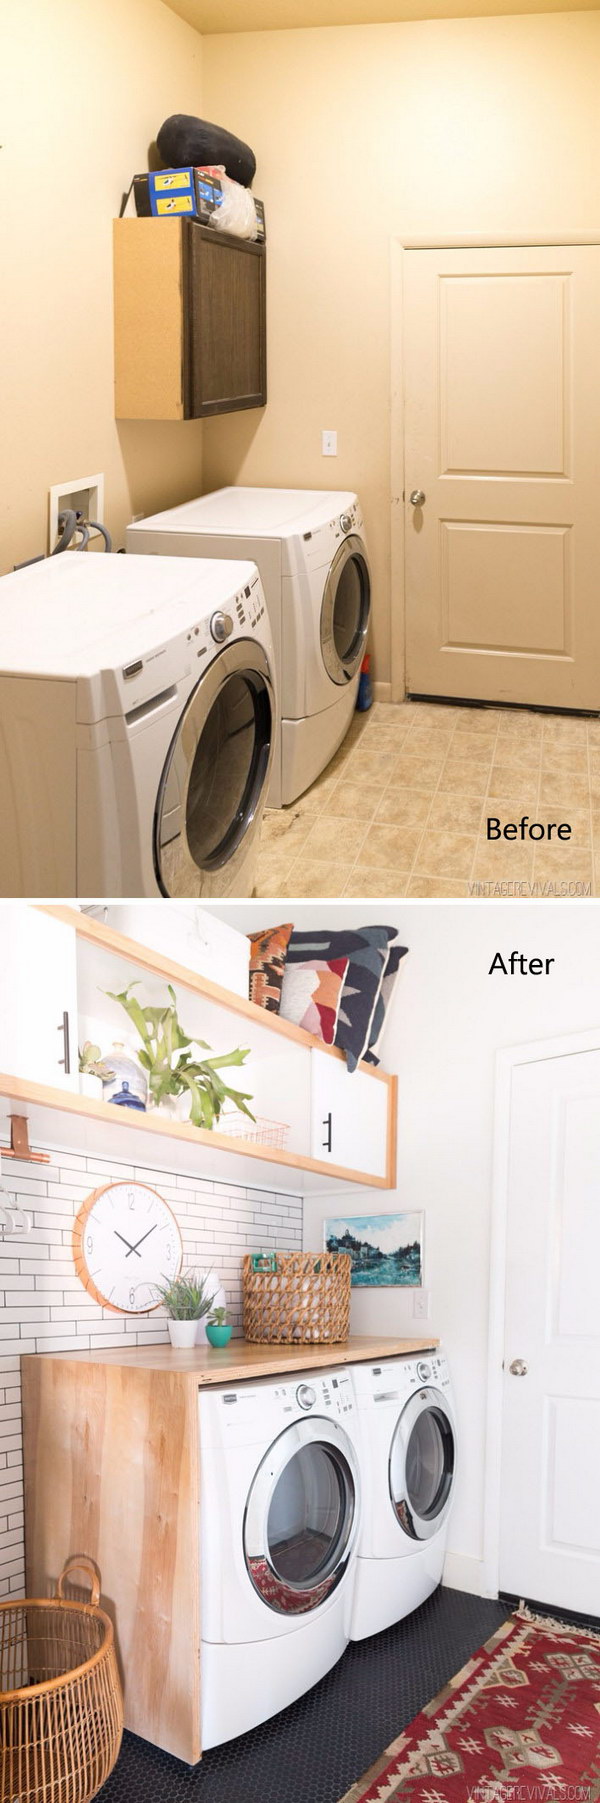 Budget Laundry Room Makeover Reveal with white subway tiles, black penny tile floors, and closet. 